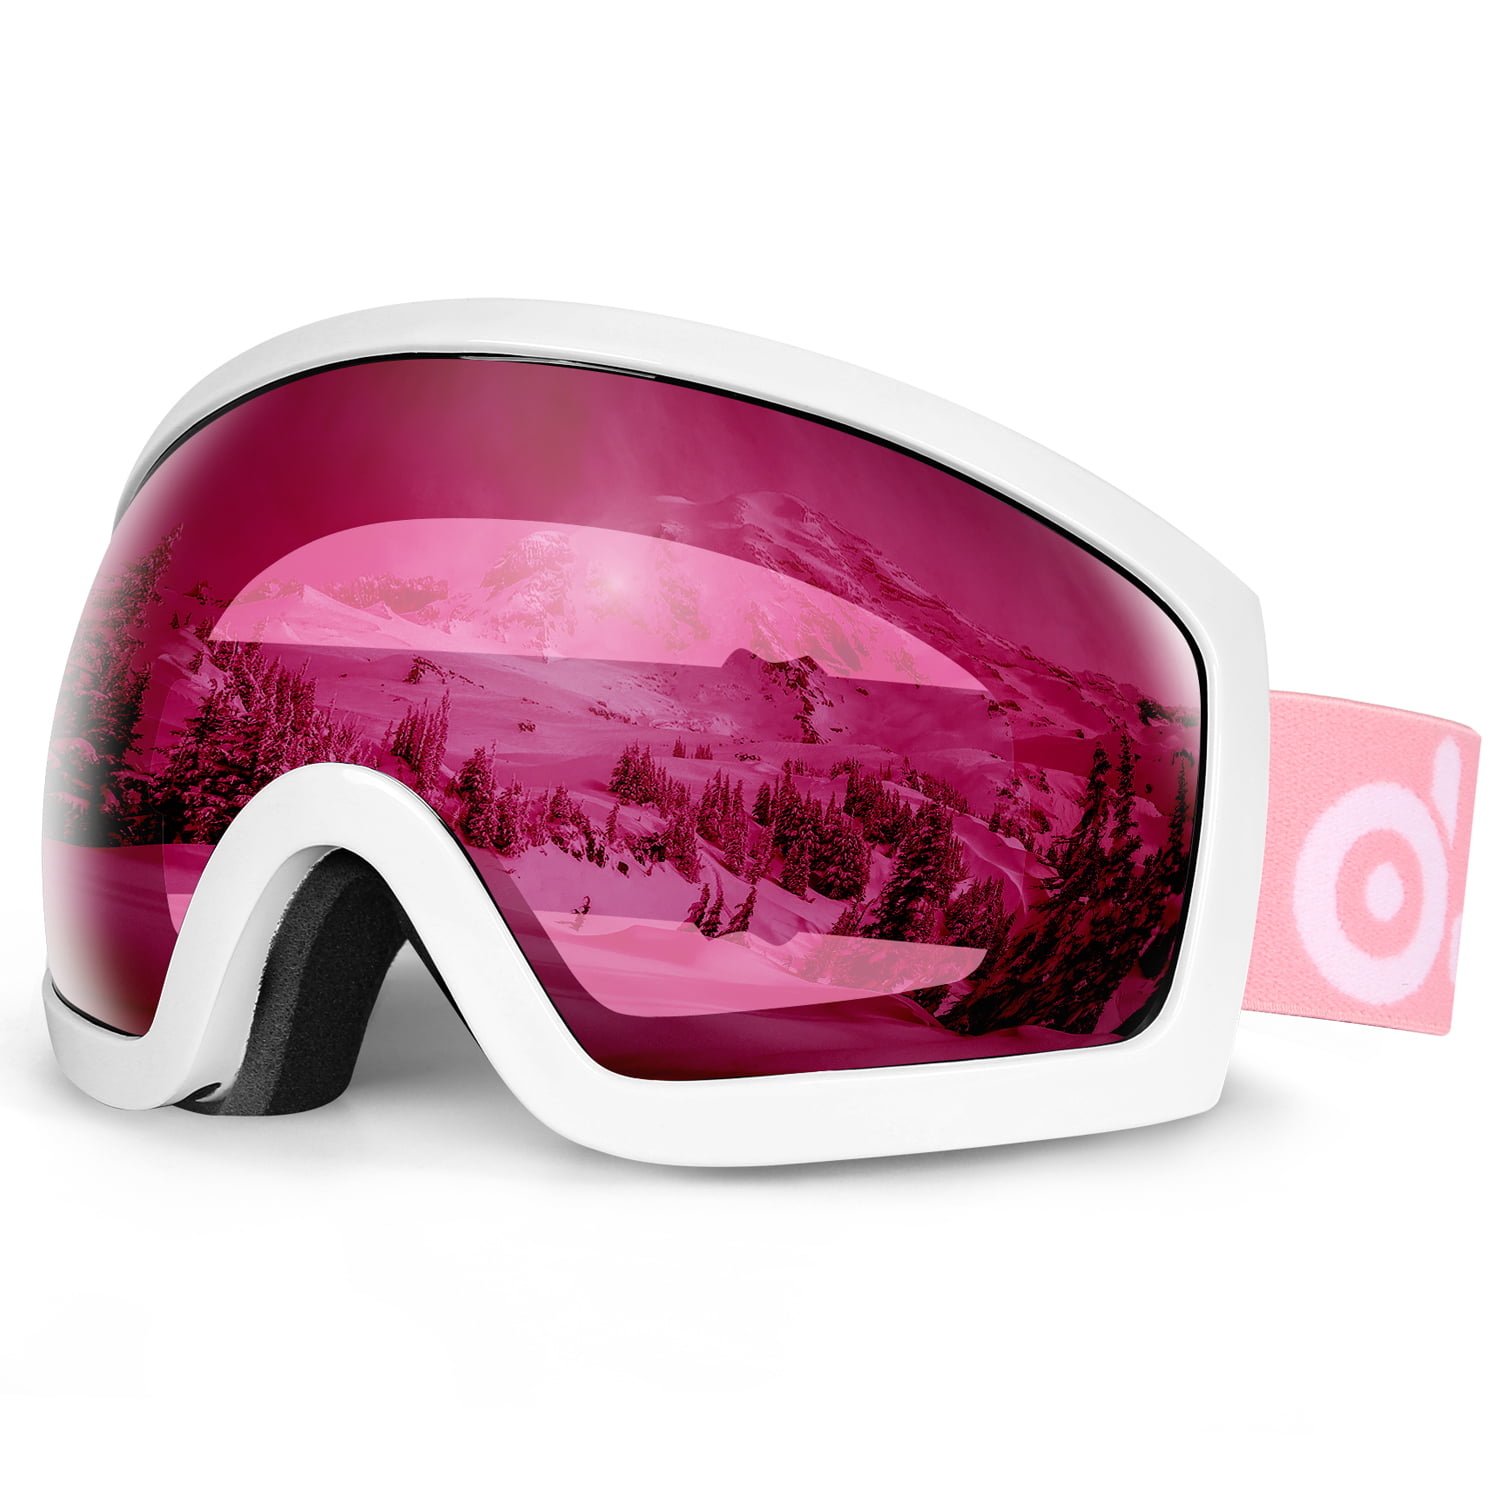 Odoland Ski Snow Goggles Anti-Fog 100% UV400 Protection Winter Snow Sports Snowboard Goggles for Men and Women S2 OTG Double Lens Goggles for Snowmobile Skiing Skating